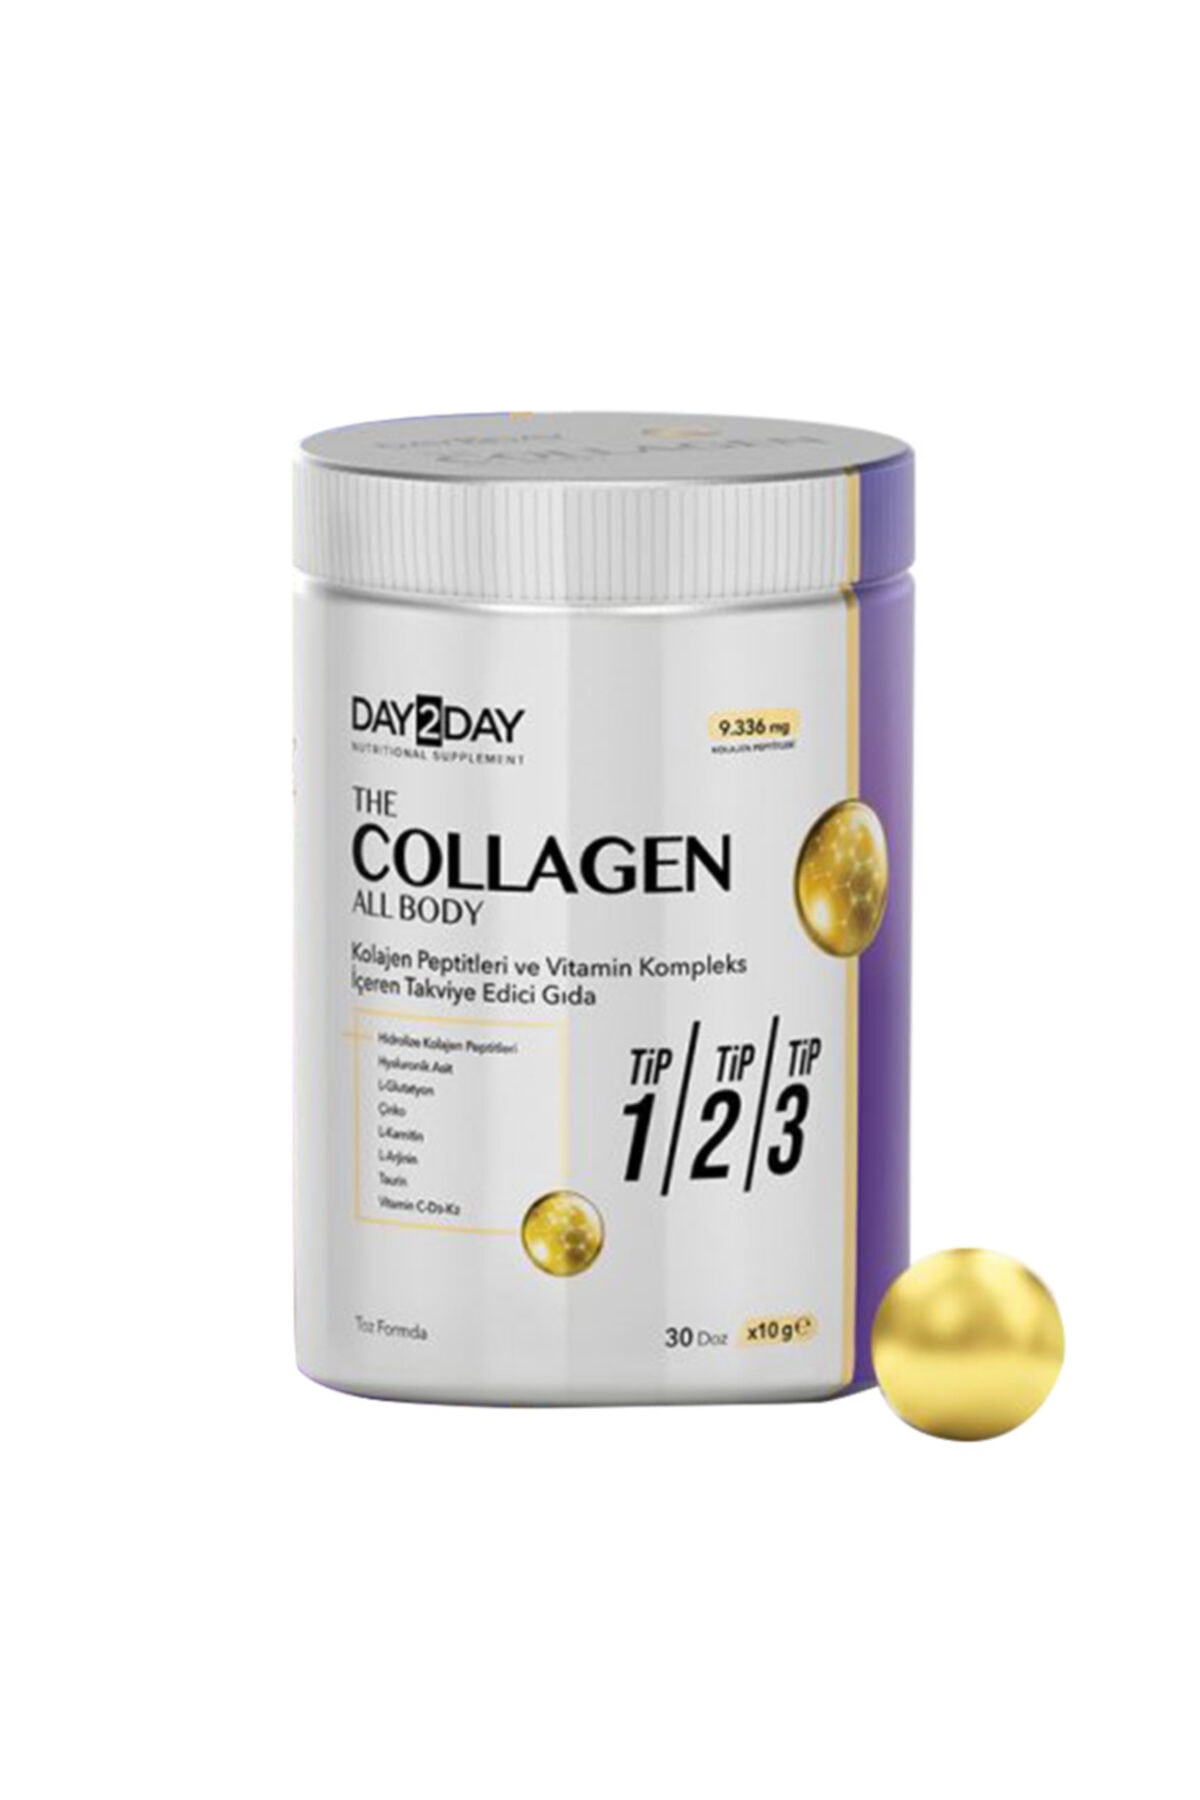 DAY2DAY The Collagen All Body 30 Doz